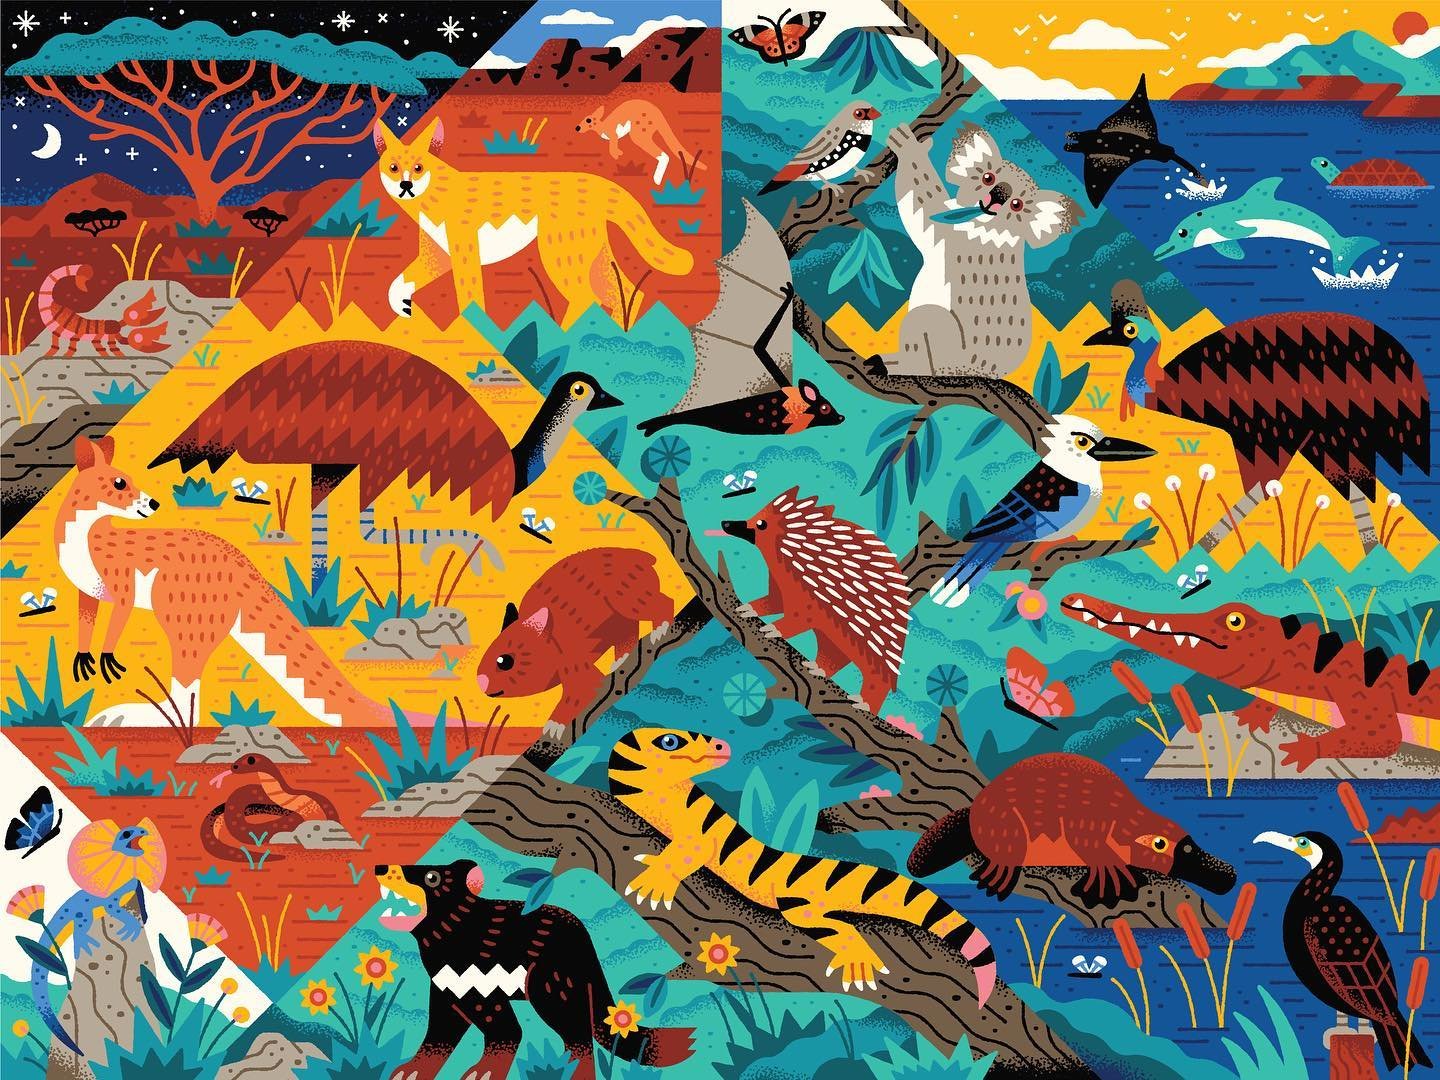 colorful scenes from down under. lots of unique animals for an upcoming kids project
.
.
.
.
.
#vectorillustration #illustration #illustrator #australia #australiananimals #truegrittexturesupply #vectorart